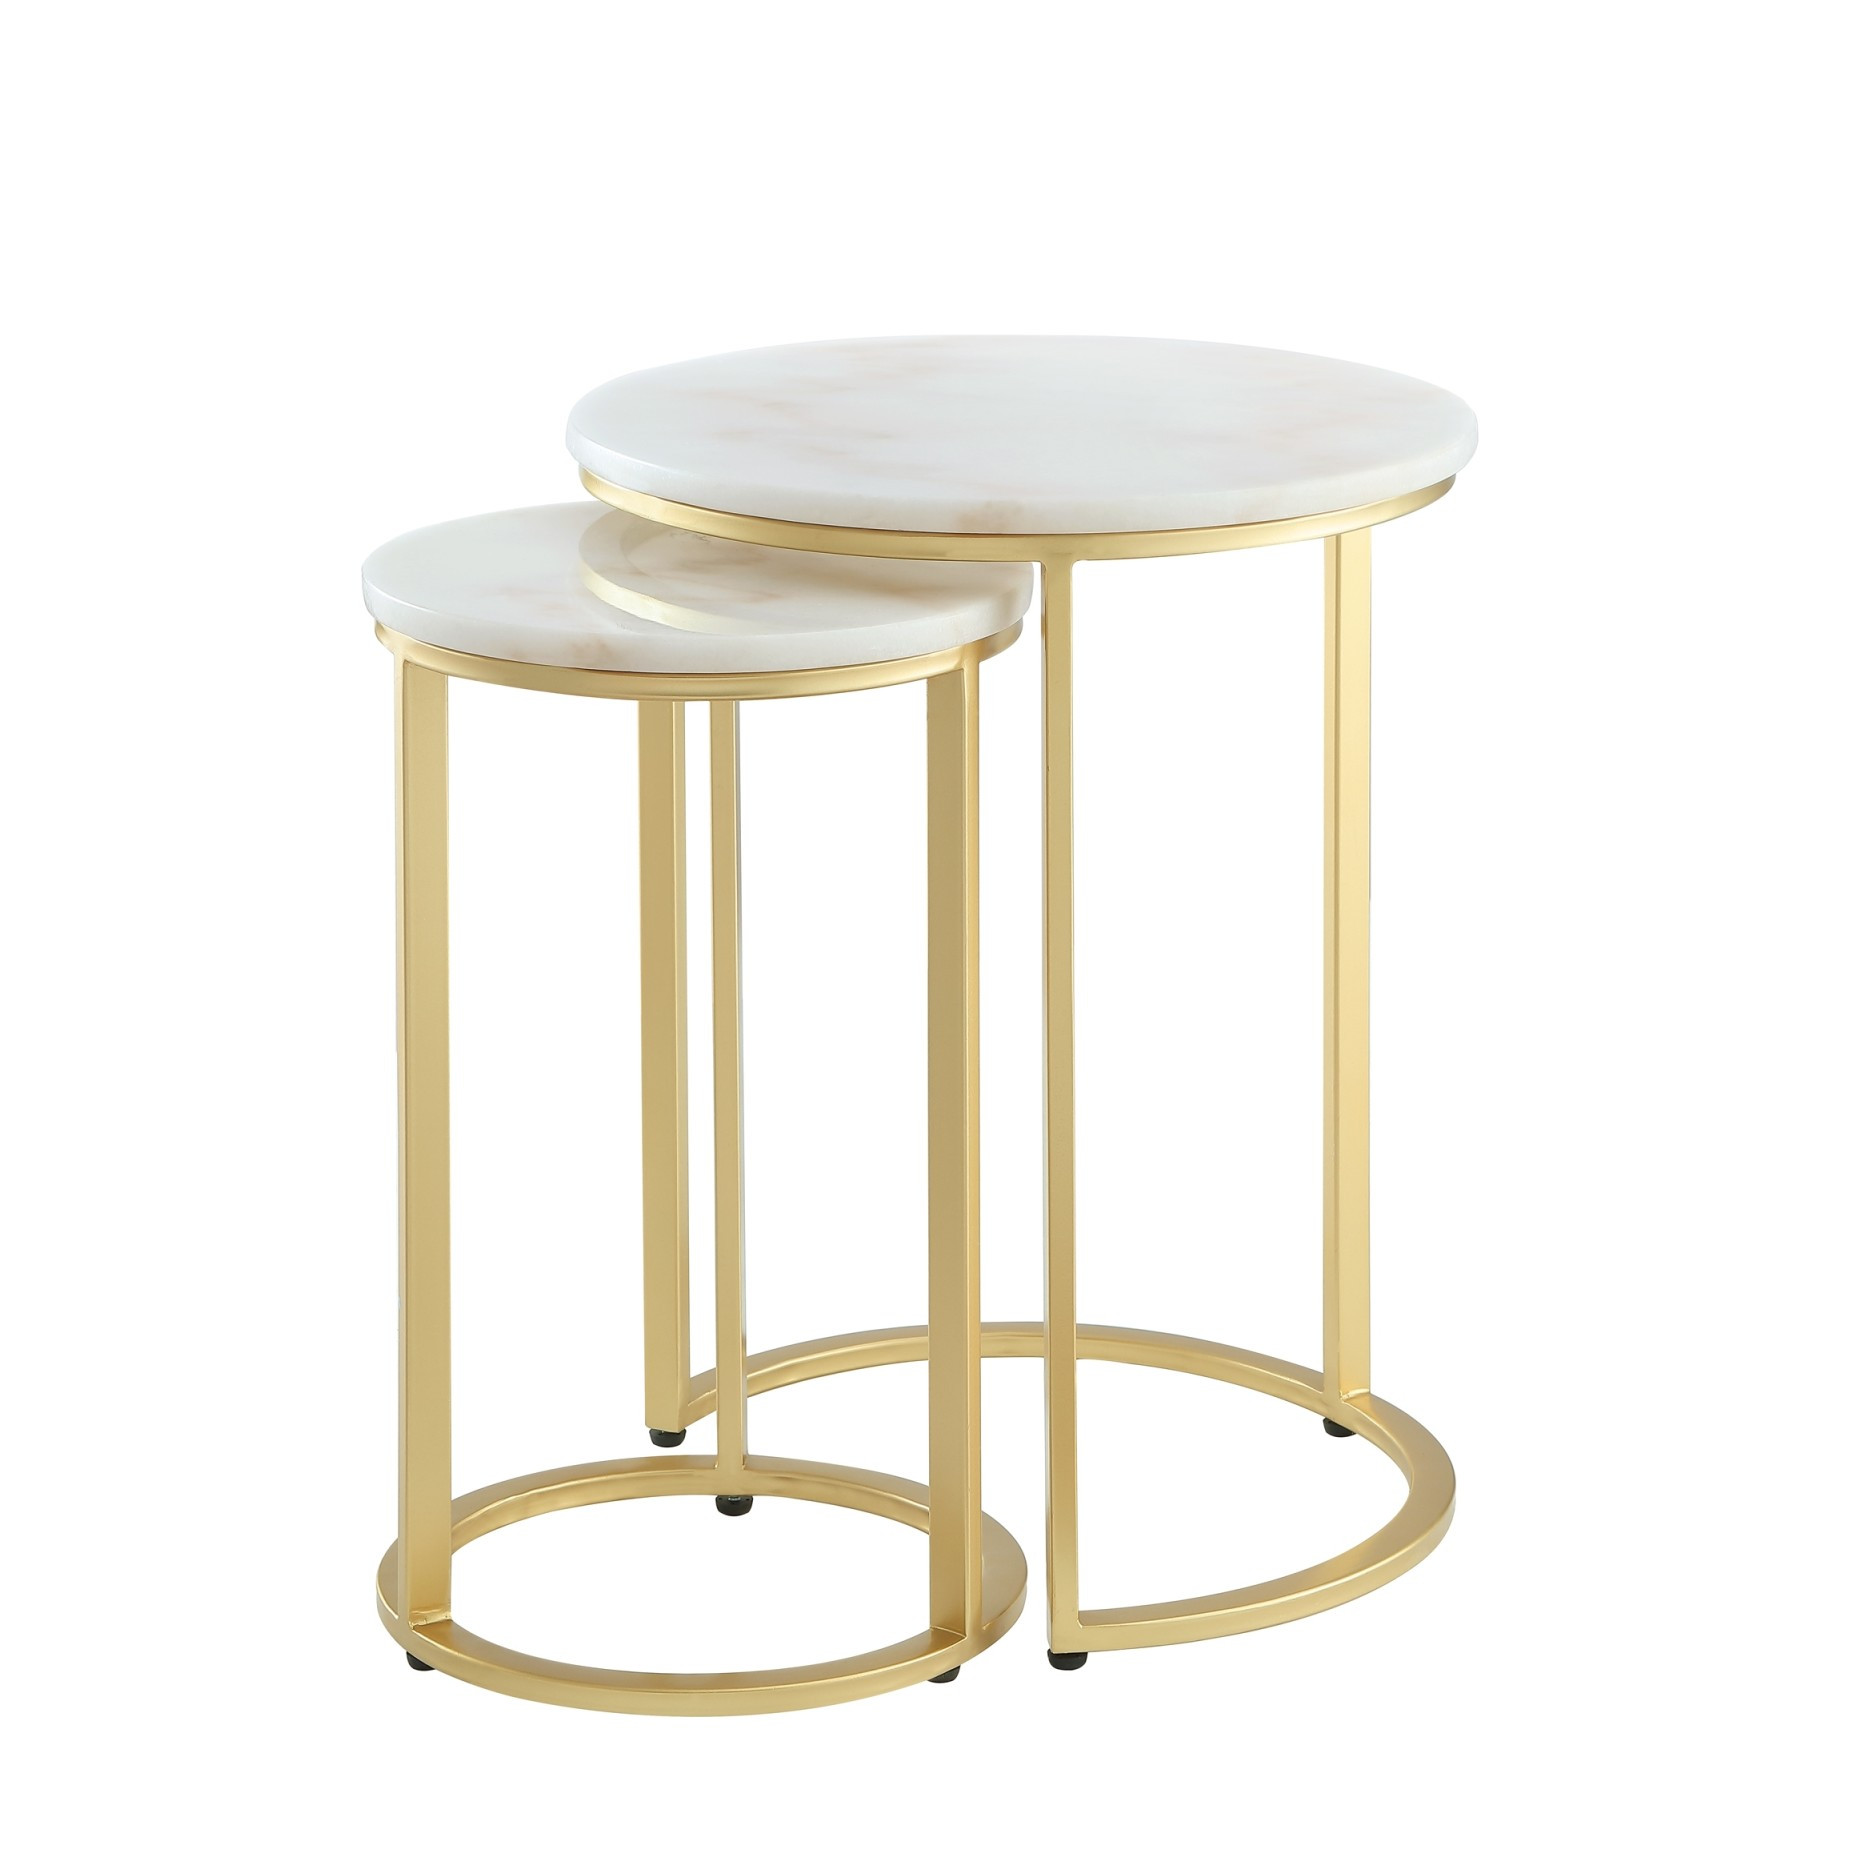 Set of Two 22" Gold and White Marble Round Nested Tables-543883-1